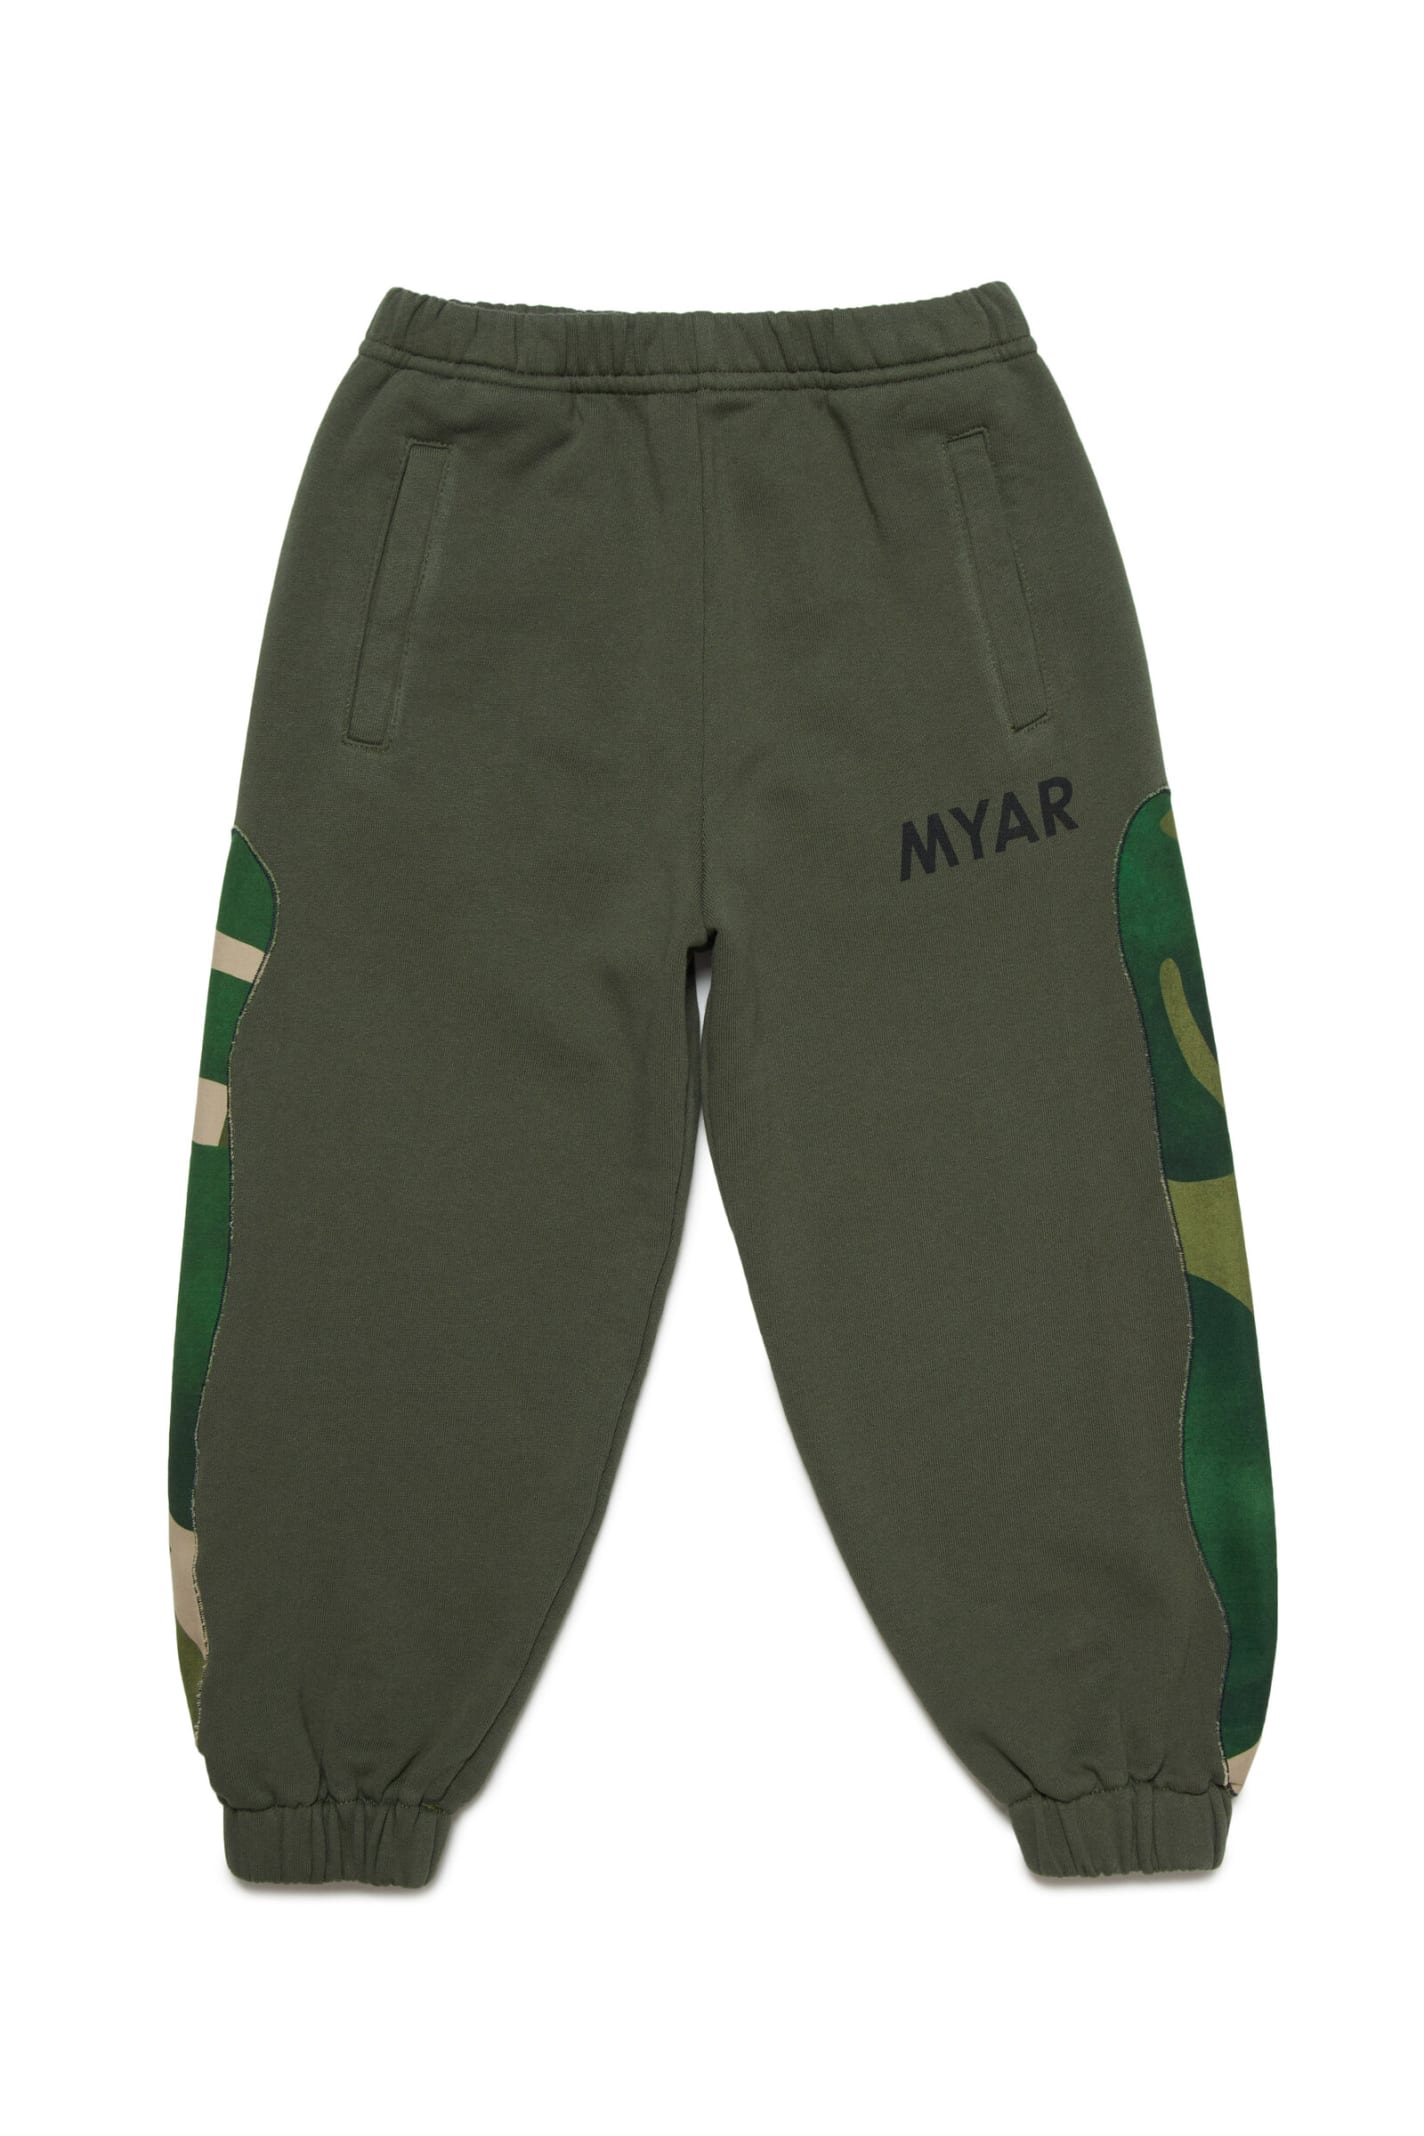 Myar Kids' Plush Jogger Trousers With Rainforest Patterned Fabric Applications In Green